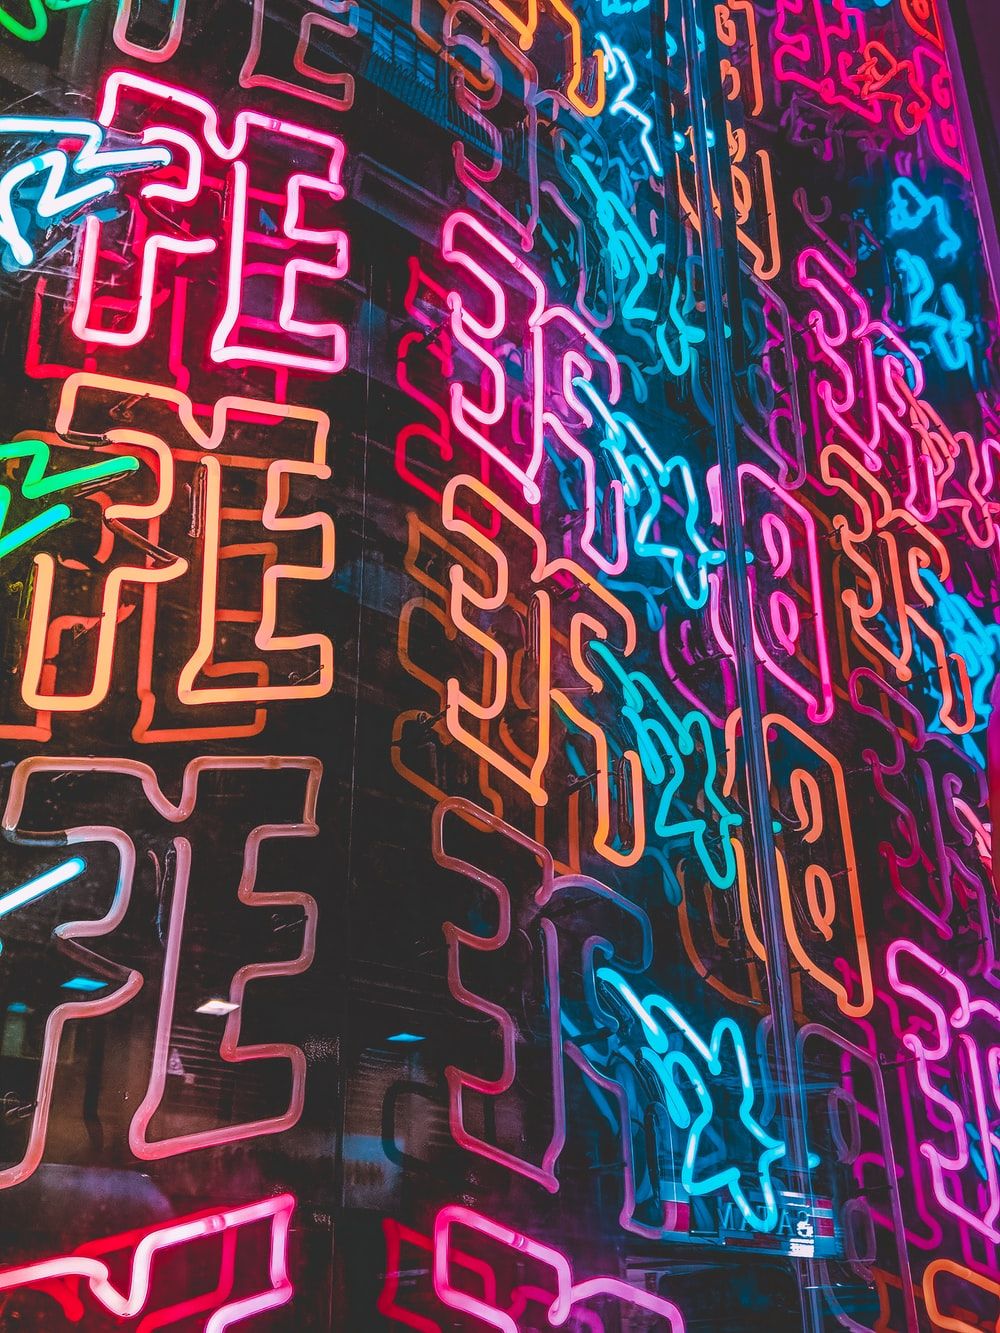 Neon Light Picture. Download Free Image